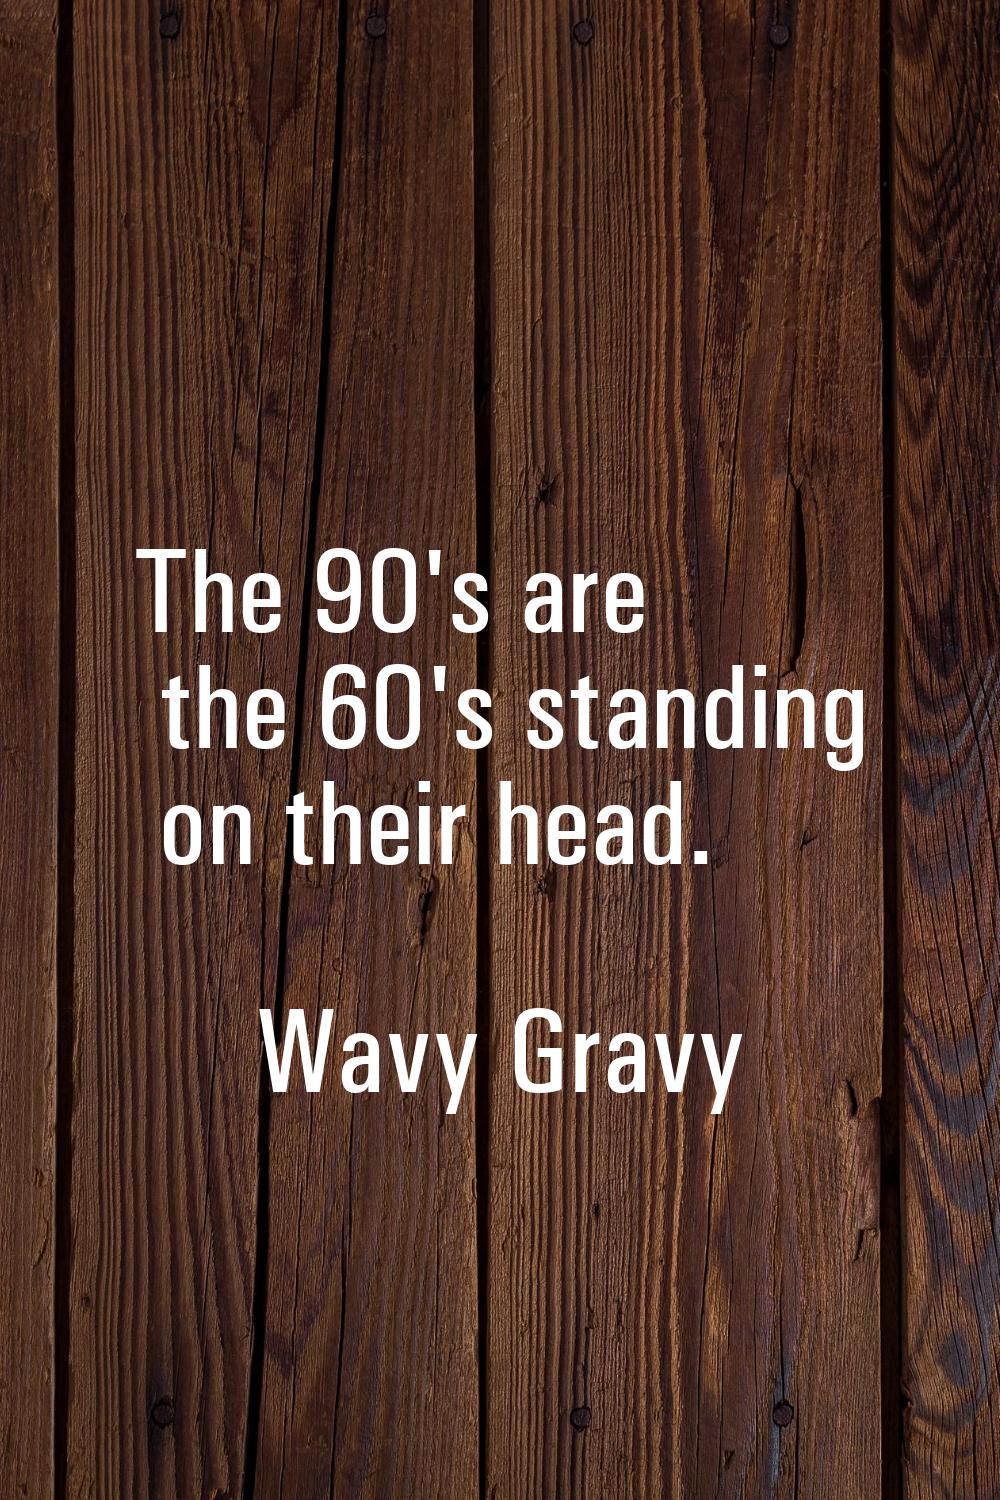 The 90's are the 60's standing on their head.